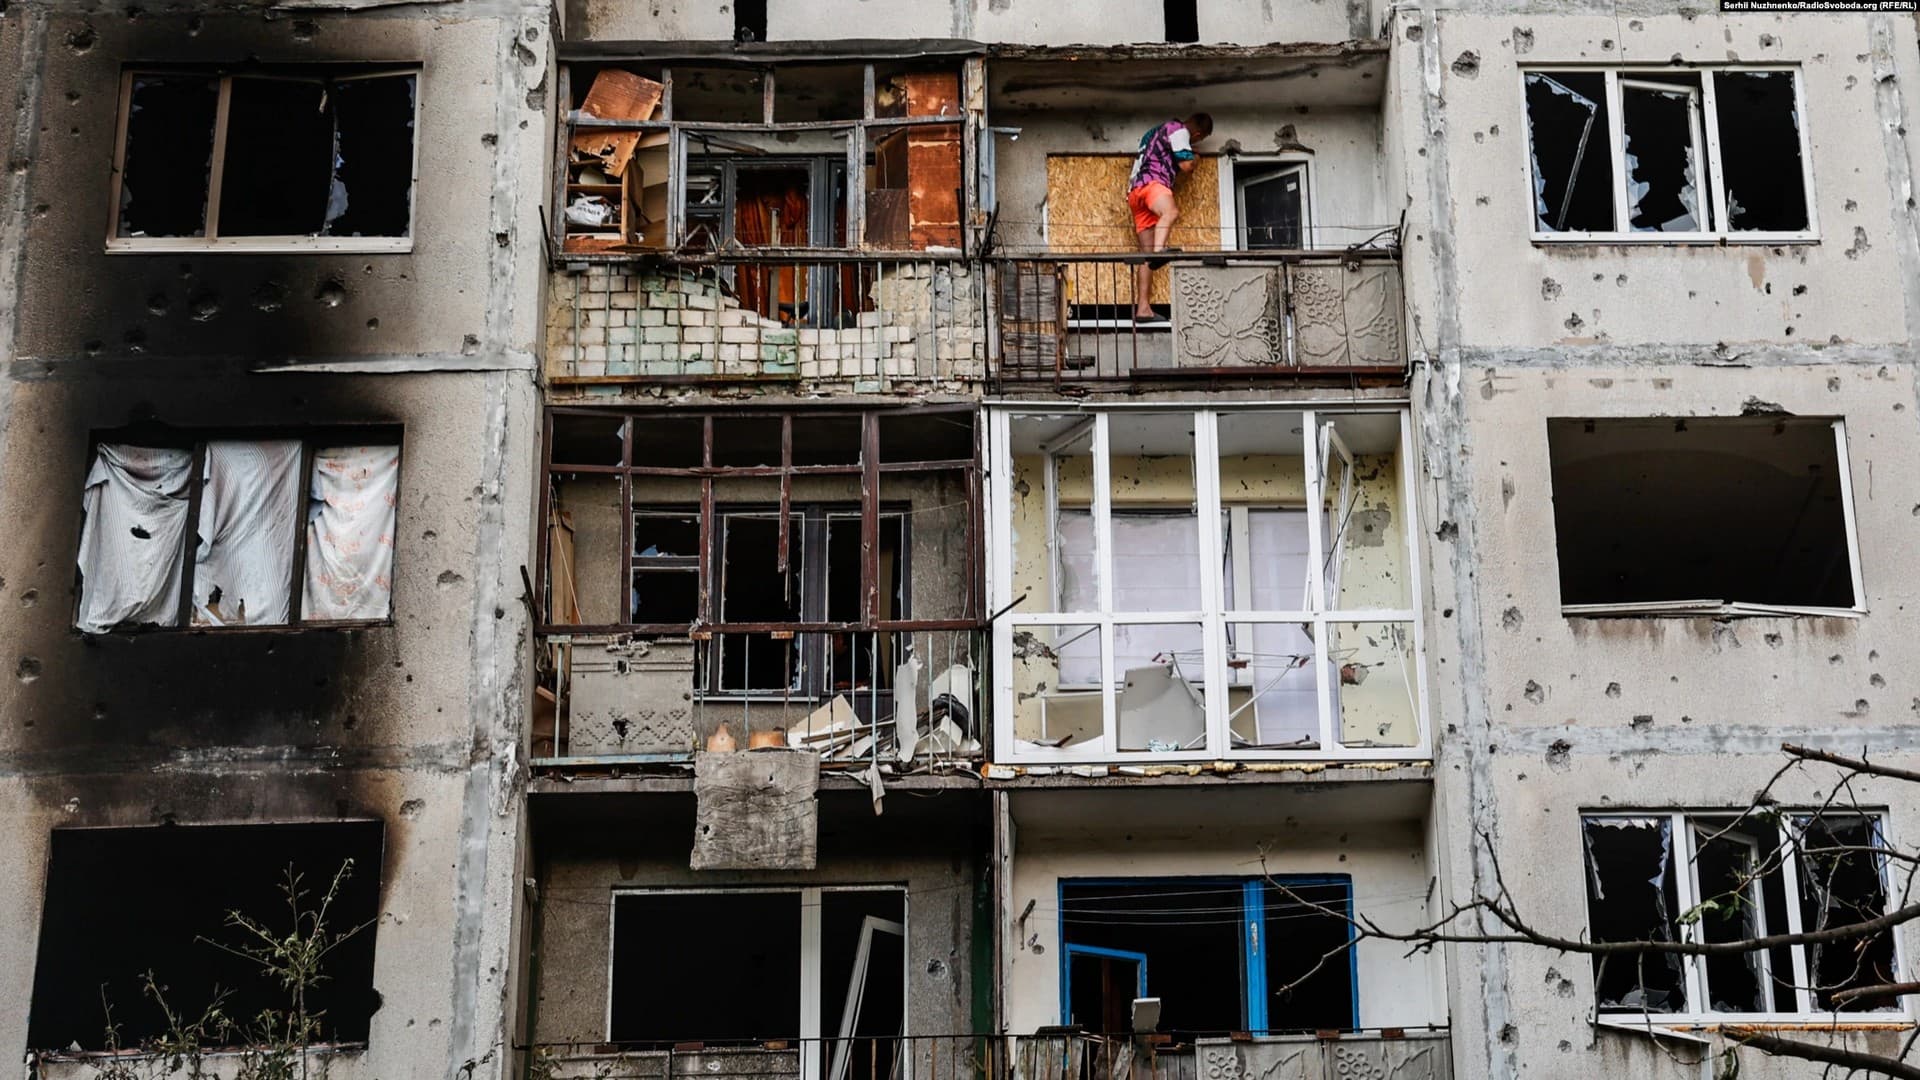 A man replaces a shattered window in an apartment building damaged by the Russian missile strike in Bakhmut